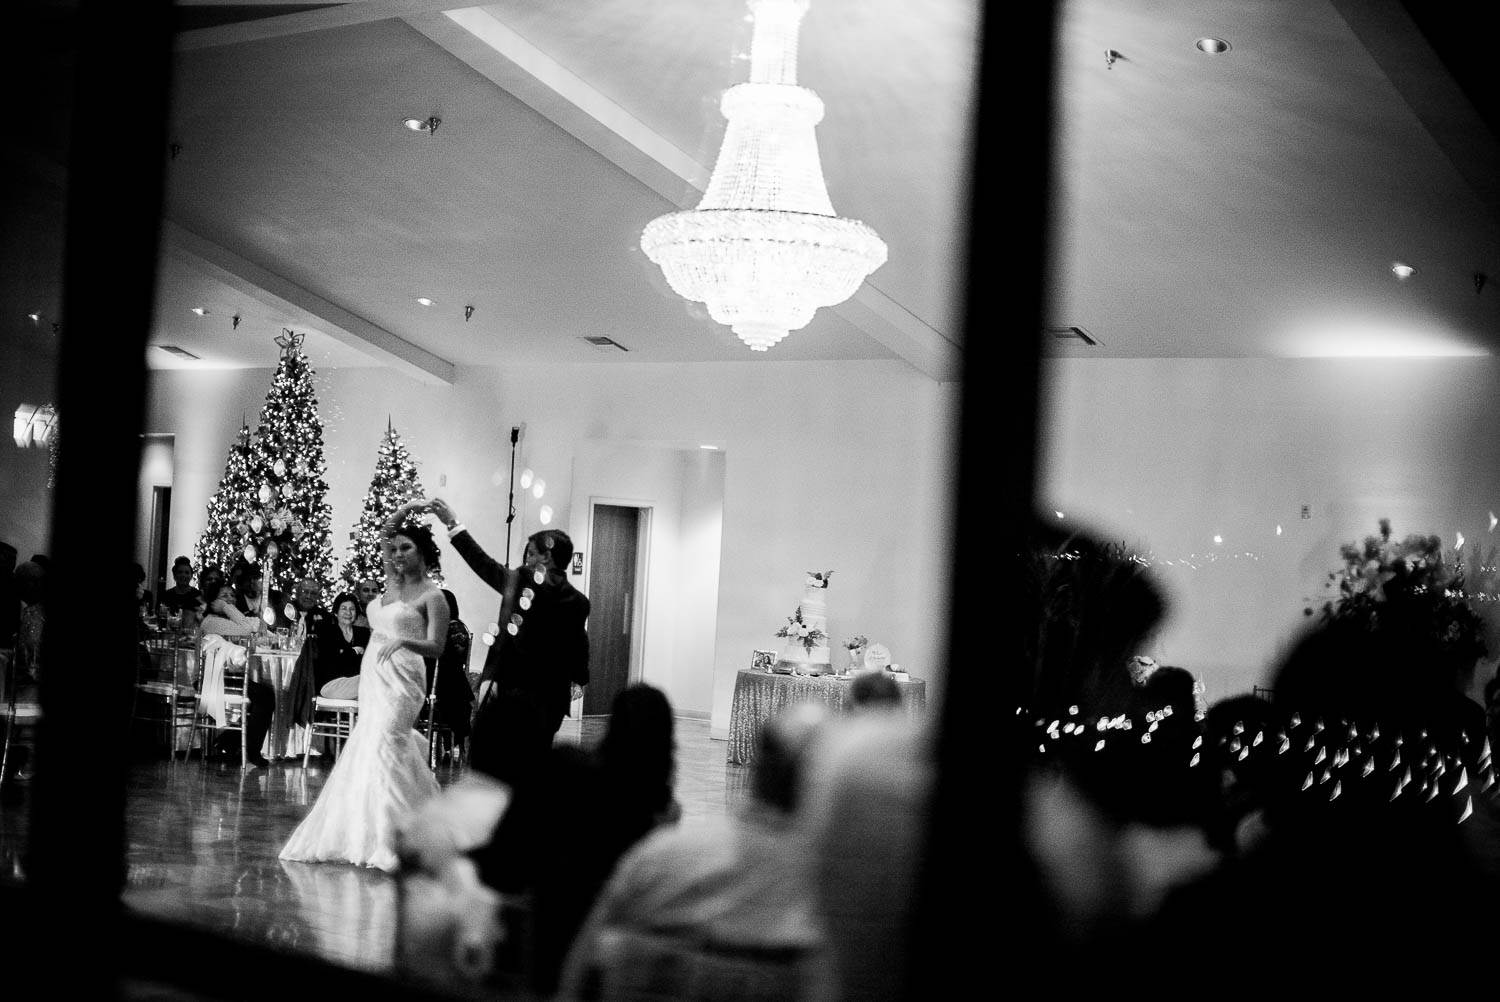 Groom dances with bride at a wedding reception granberry-hills-weddings-philip-thomas-photography